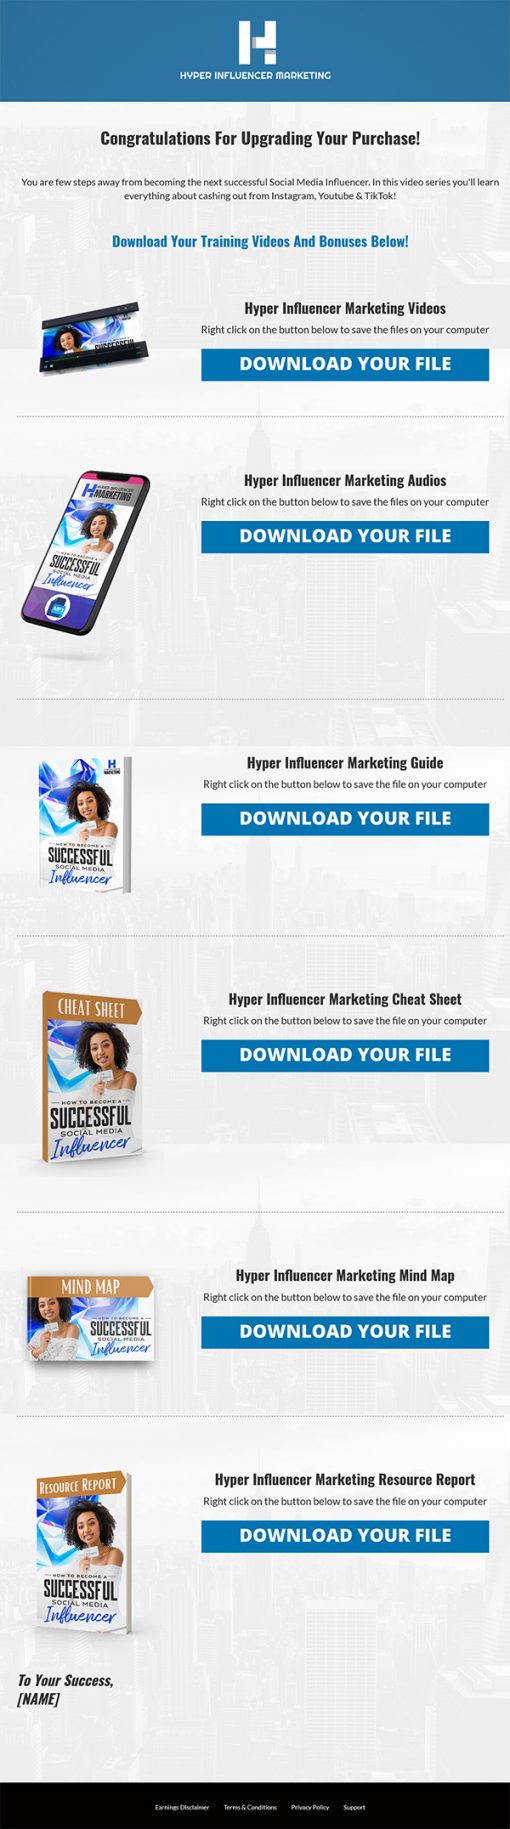 Become a Successful Social Media Influencer Ebook and Videos MRR